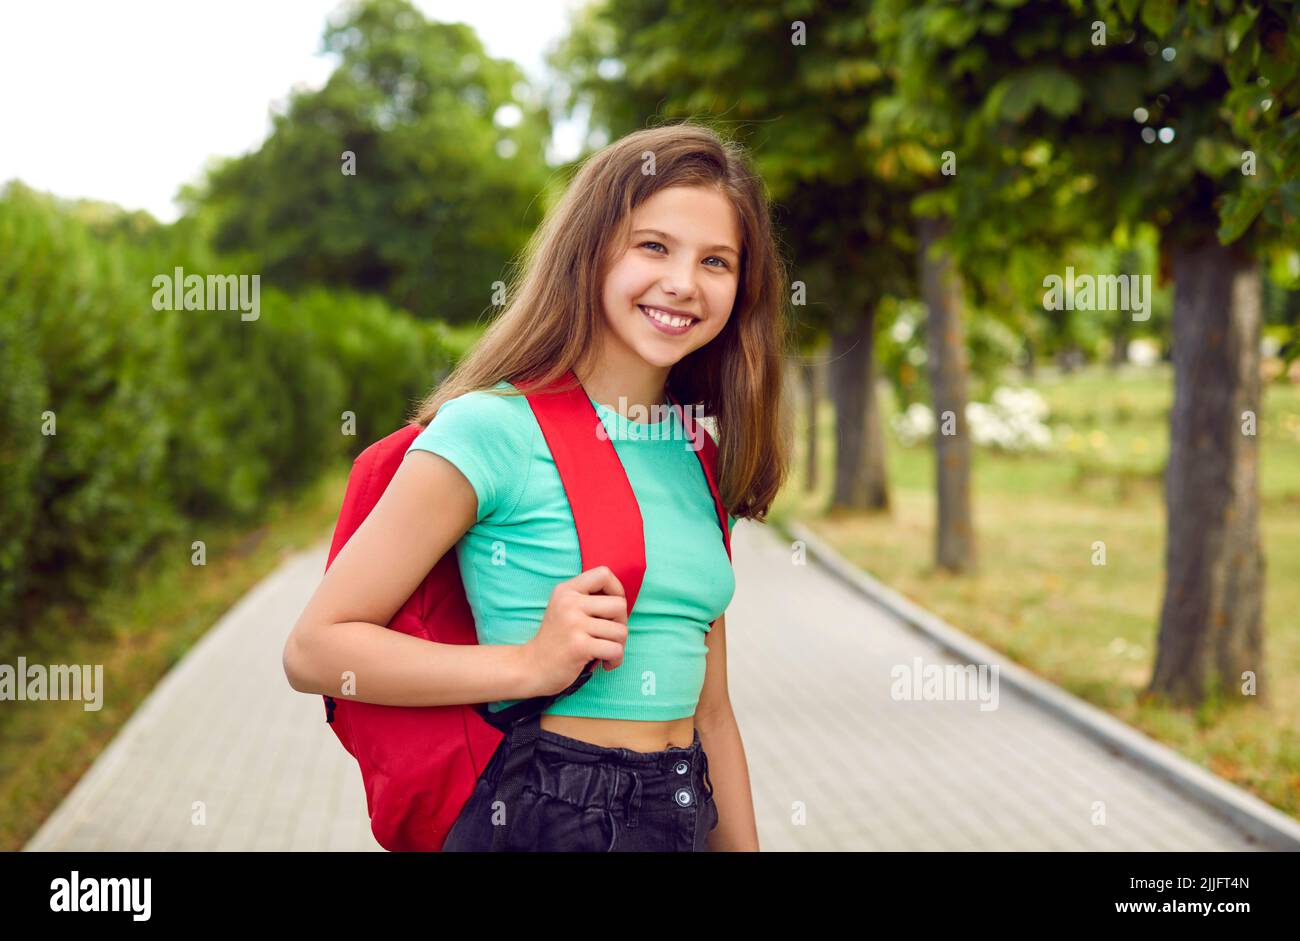 Portrait of happy, smiling teenage school girl with backpack standing in the park Stock Photo